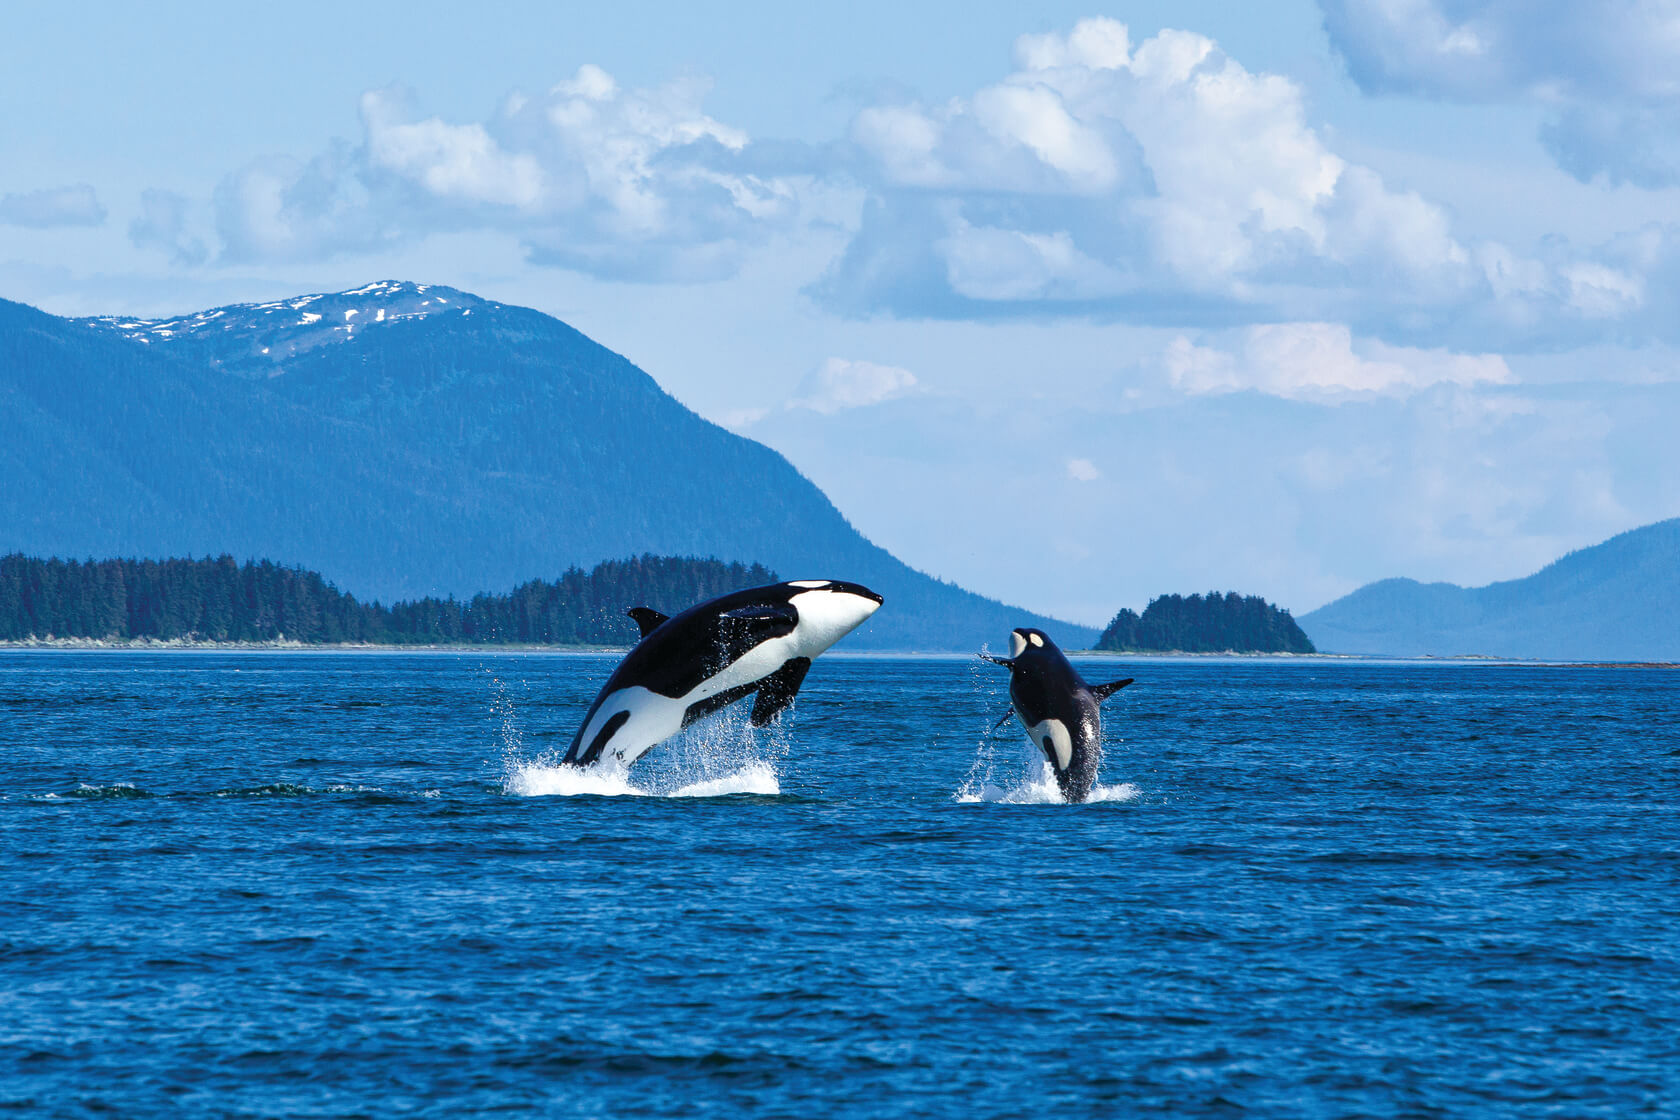 Two Killer whales breaching in waters off Alaska